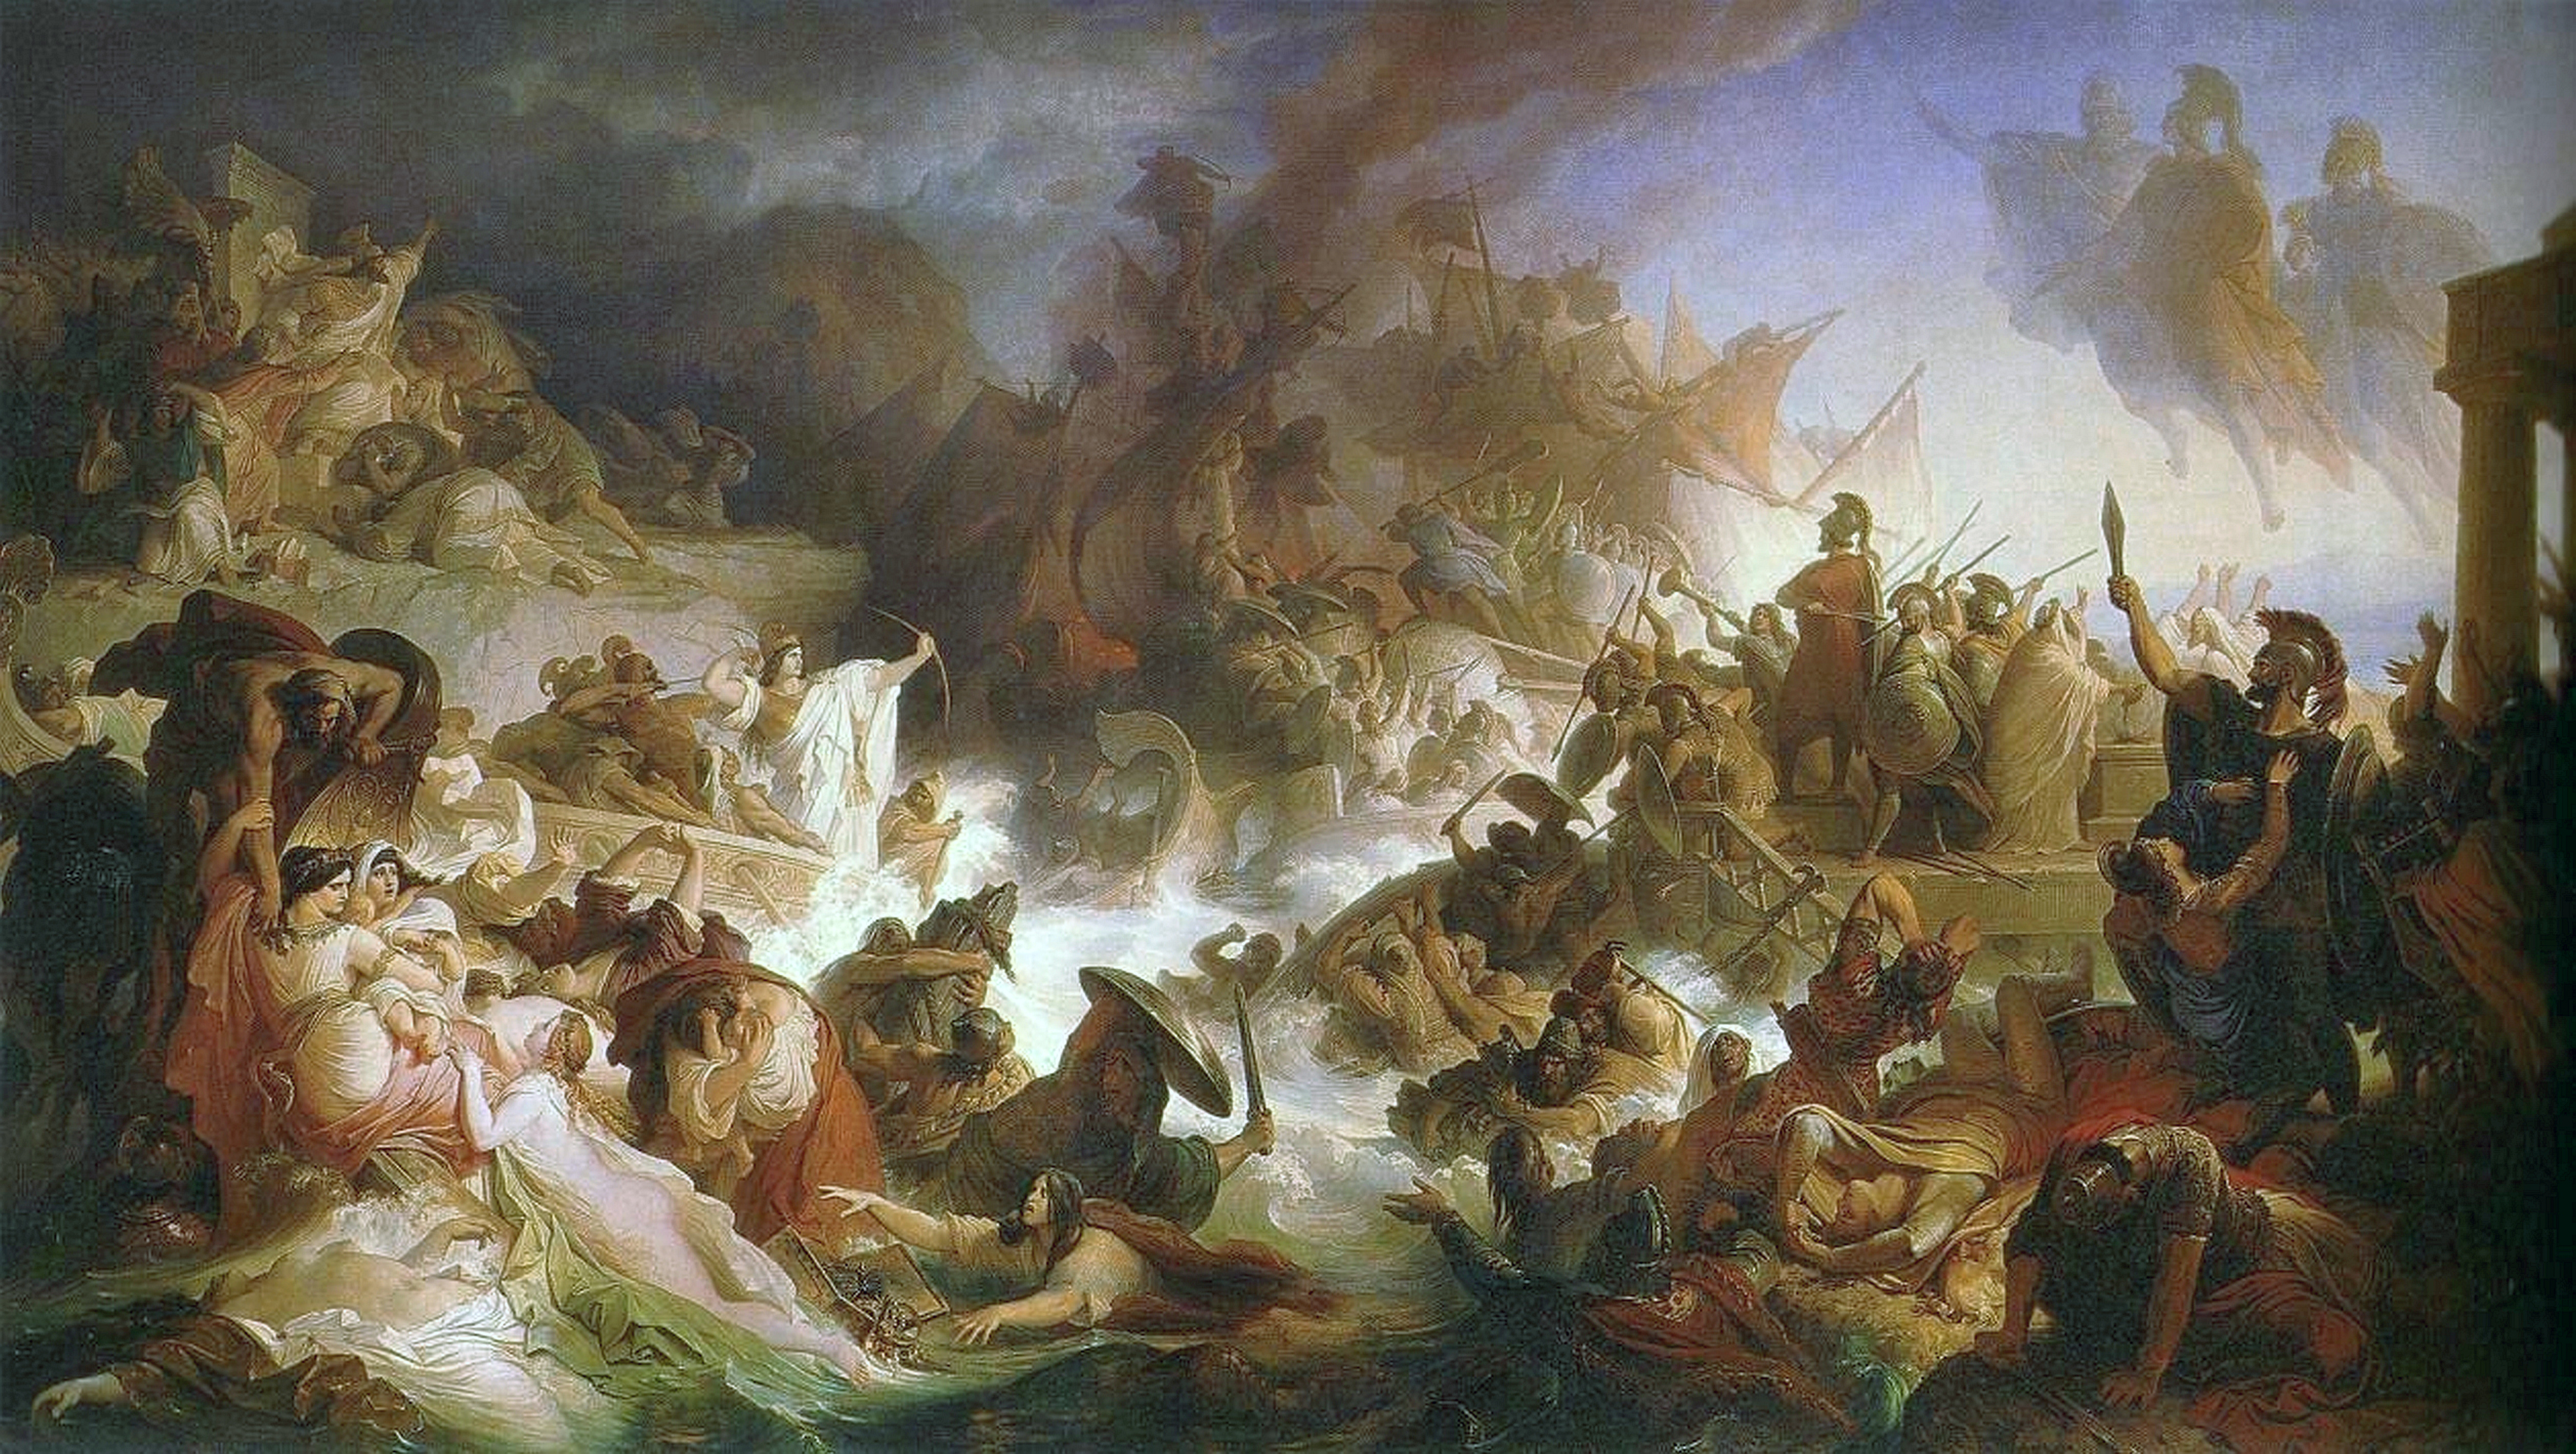 The Battle of Salamis was crucial in deciding the direction of the Greco-Persian Wars. Above, Wilhelm von Kaulbach's romantic painting of the Battle of Salamis. (Creative Commons)